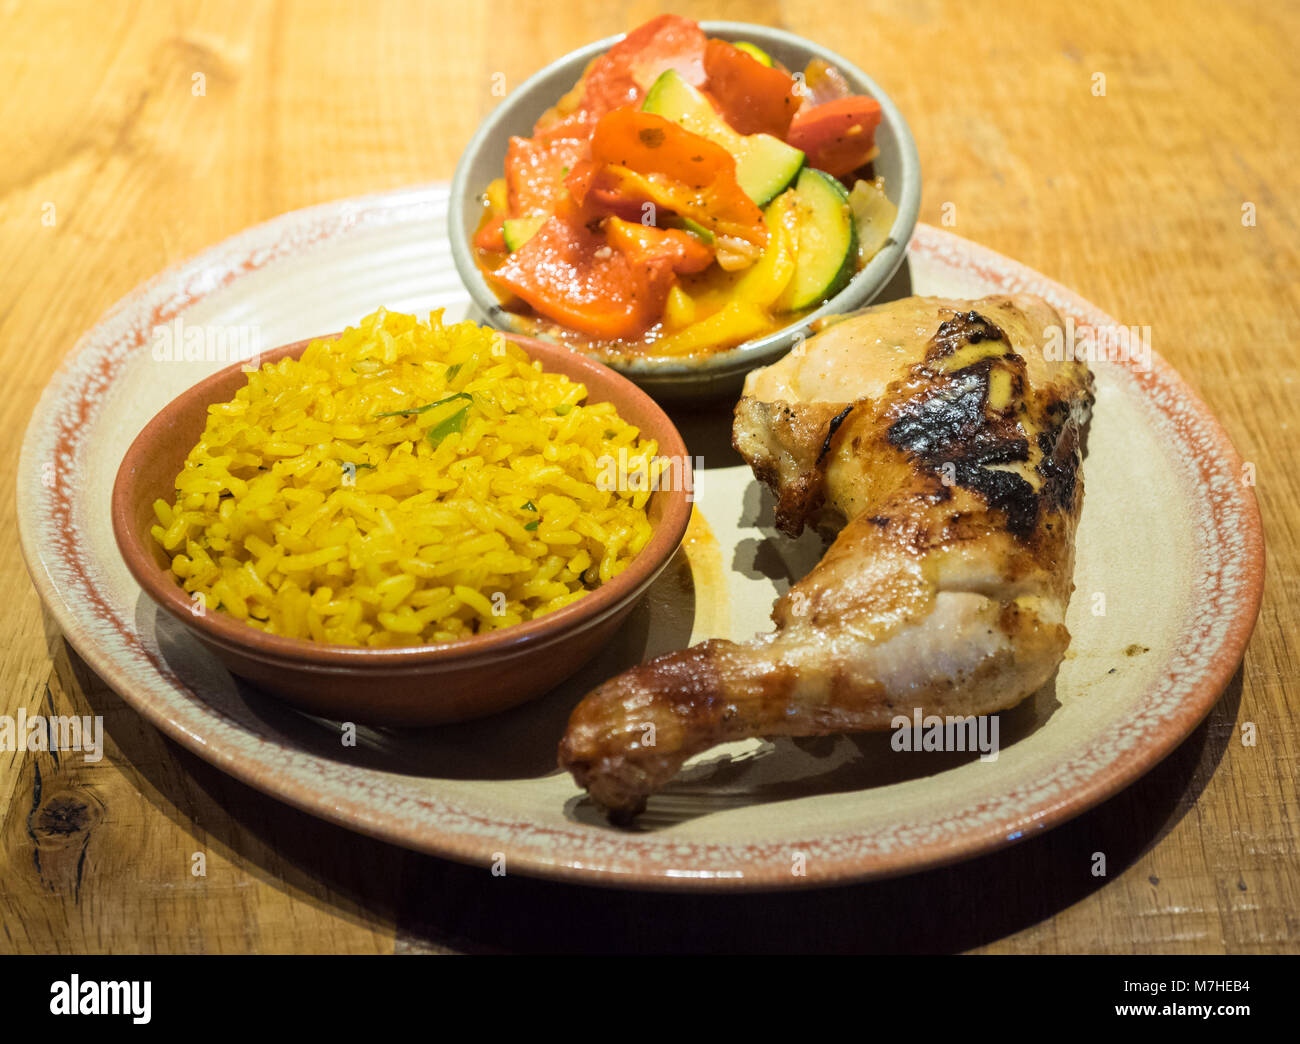 Peri-peri quarter chicken with sides of spiced rice and peri-peri vegetables from Nando's, a casual dining chain that originates from South Africa. Stock Photo